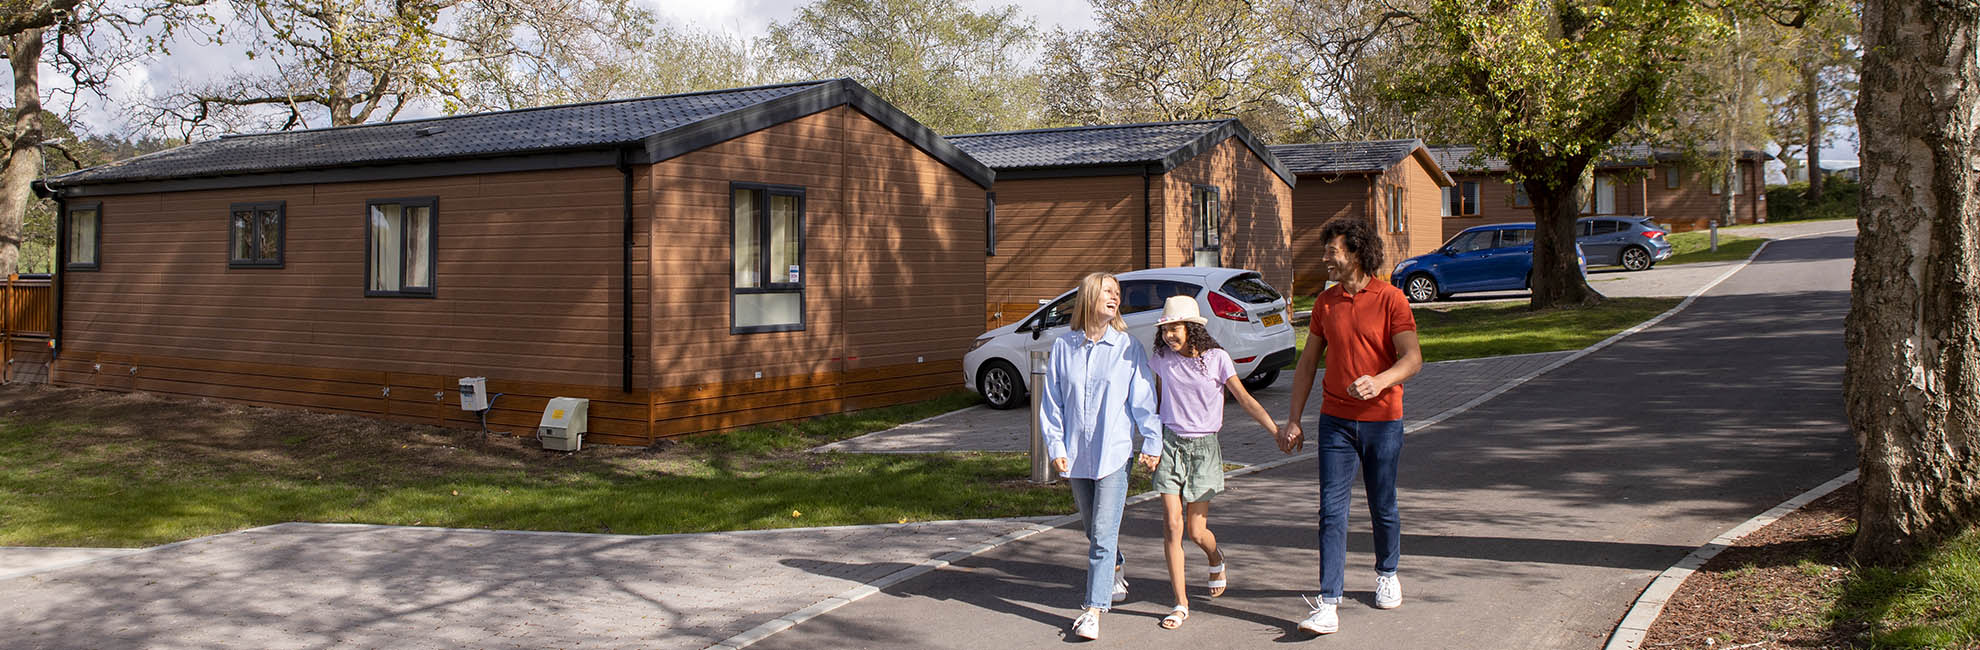 A family walking through the new lodge development at Sandford